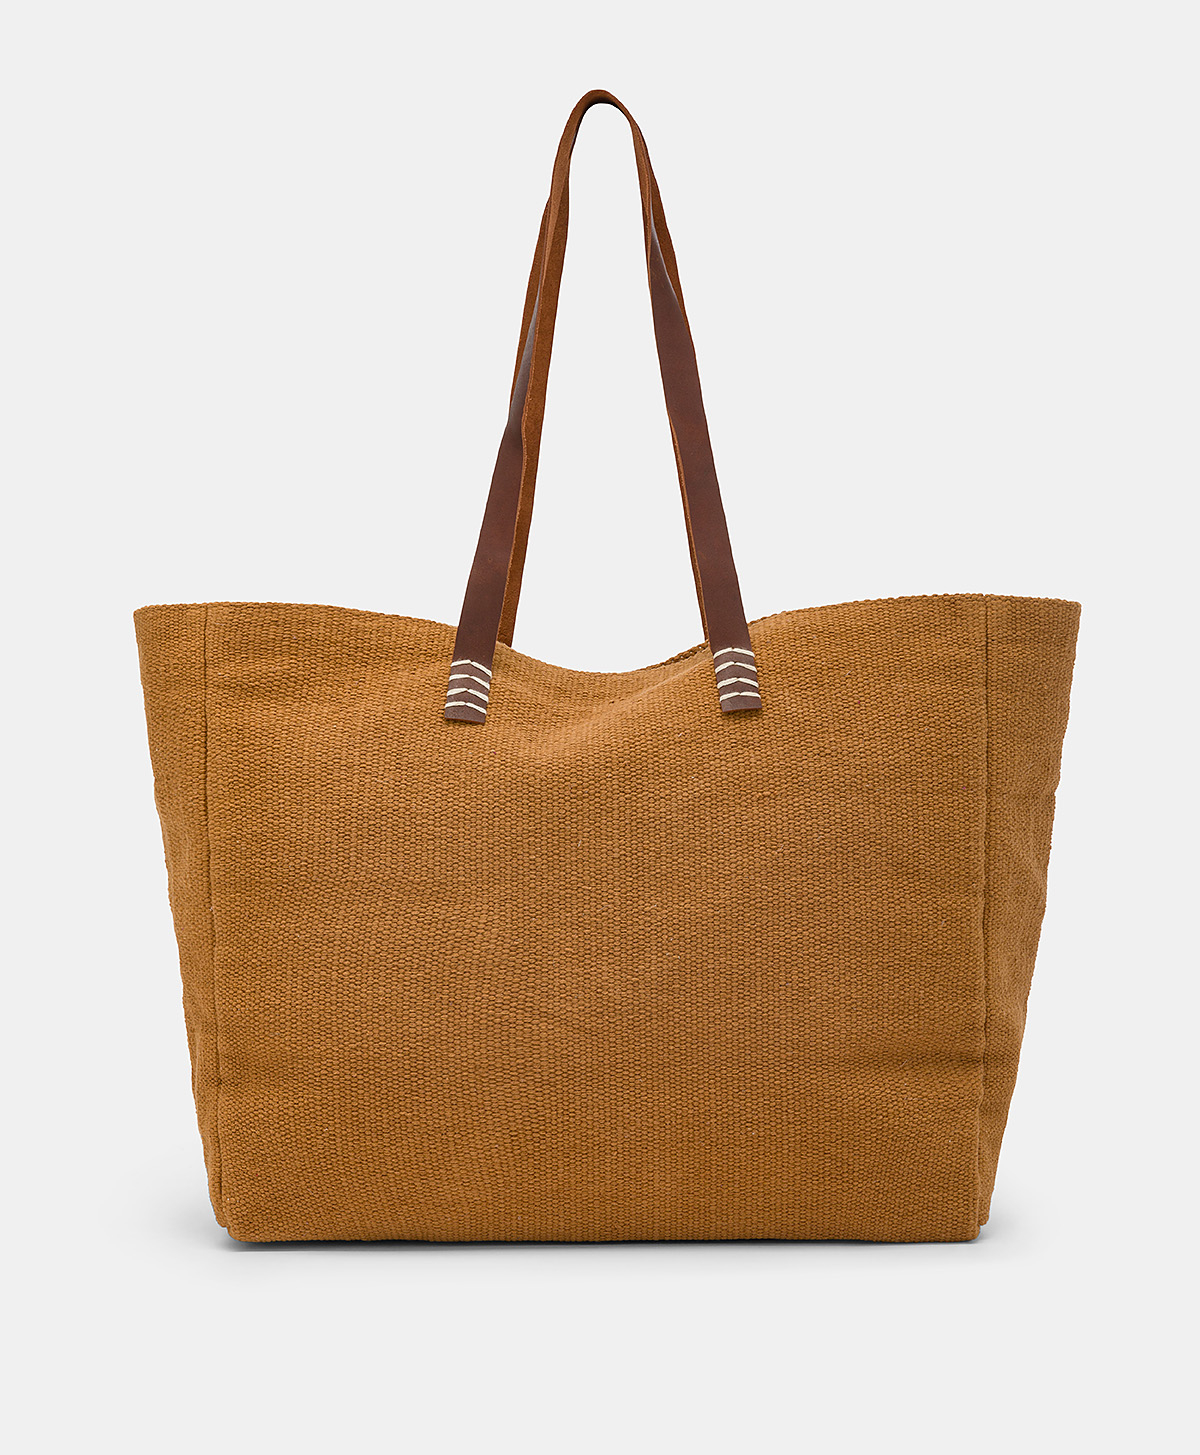 PARAGUAN BAG IN EMBROIDERED CANVAS - BRANDY - Momonì